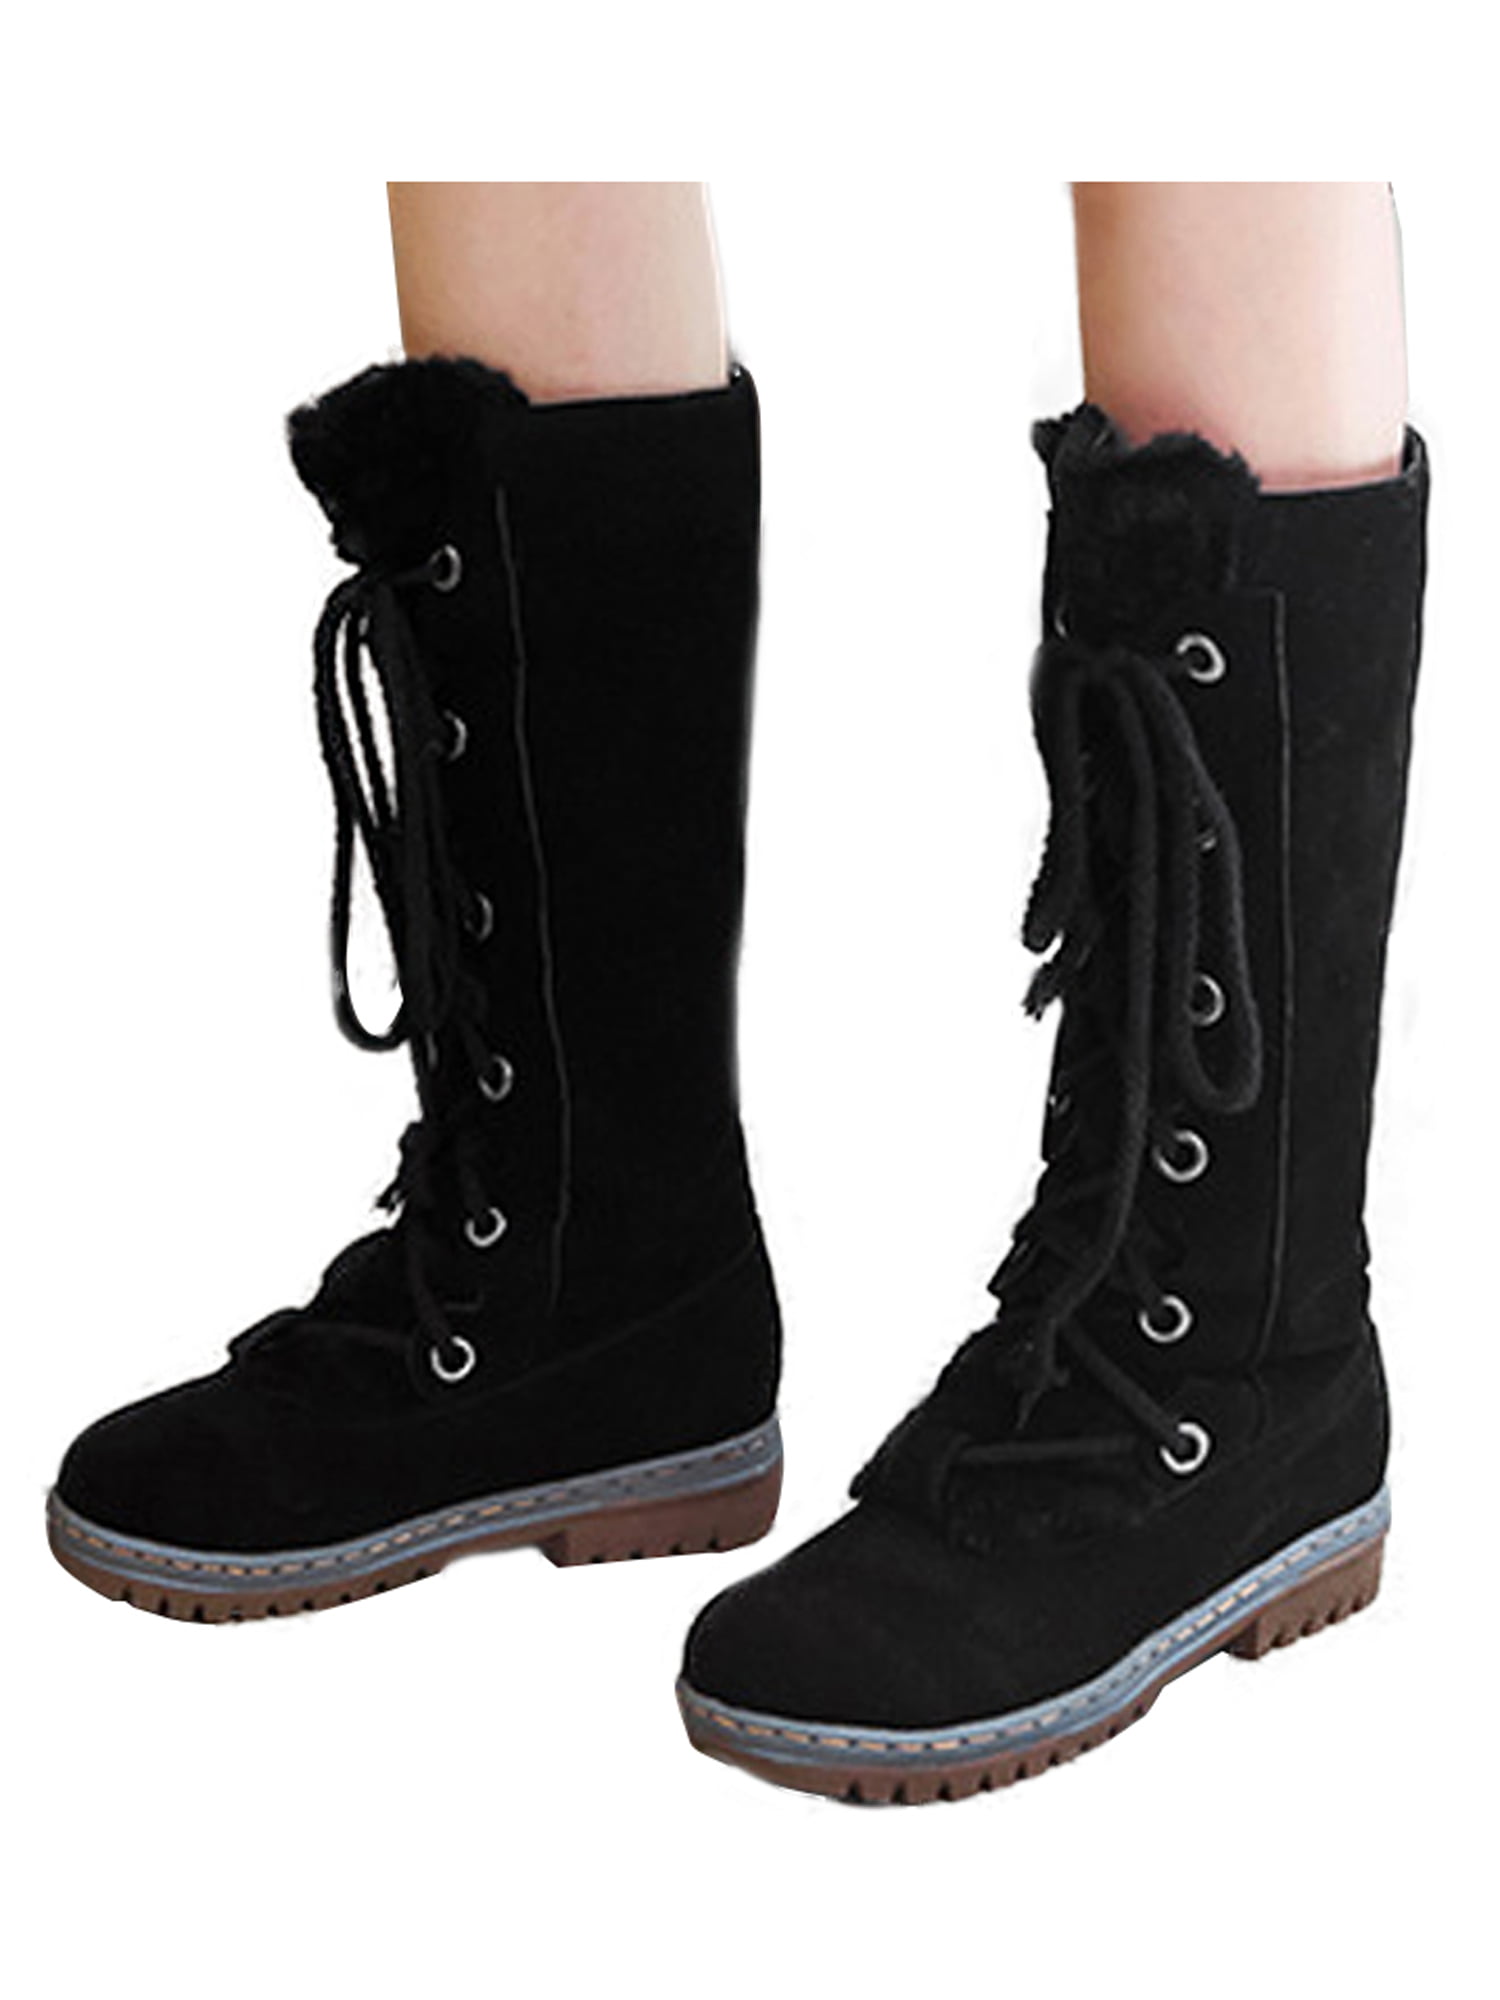 Women's Ladies Winter Warm Fur Lined Snow Boots Lace Up Zip Cotton Booties Shoes 